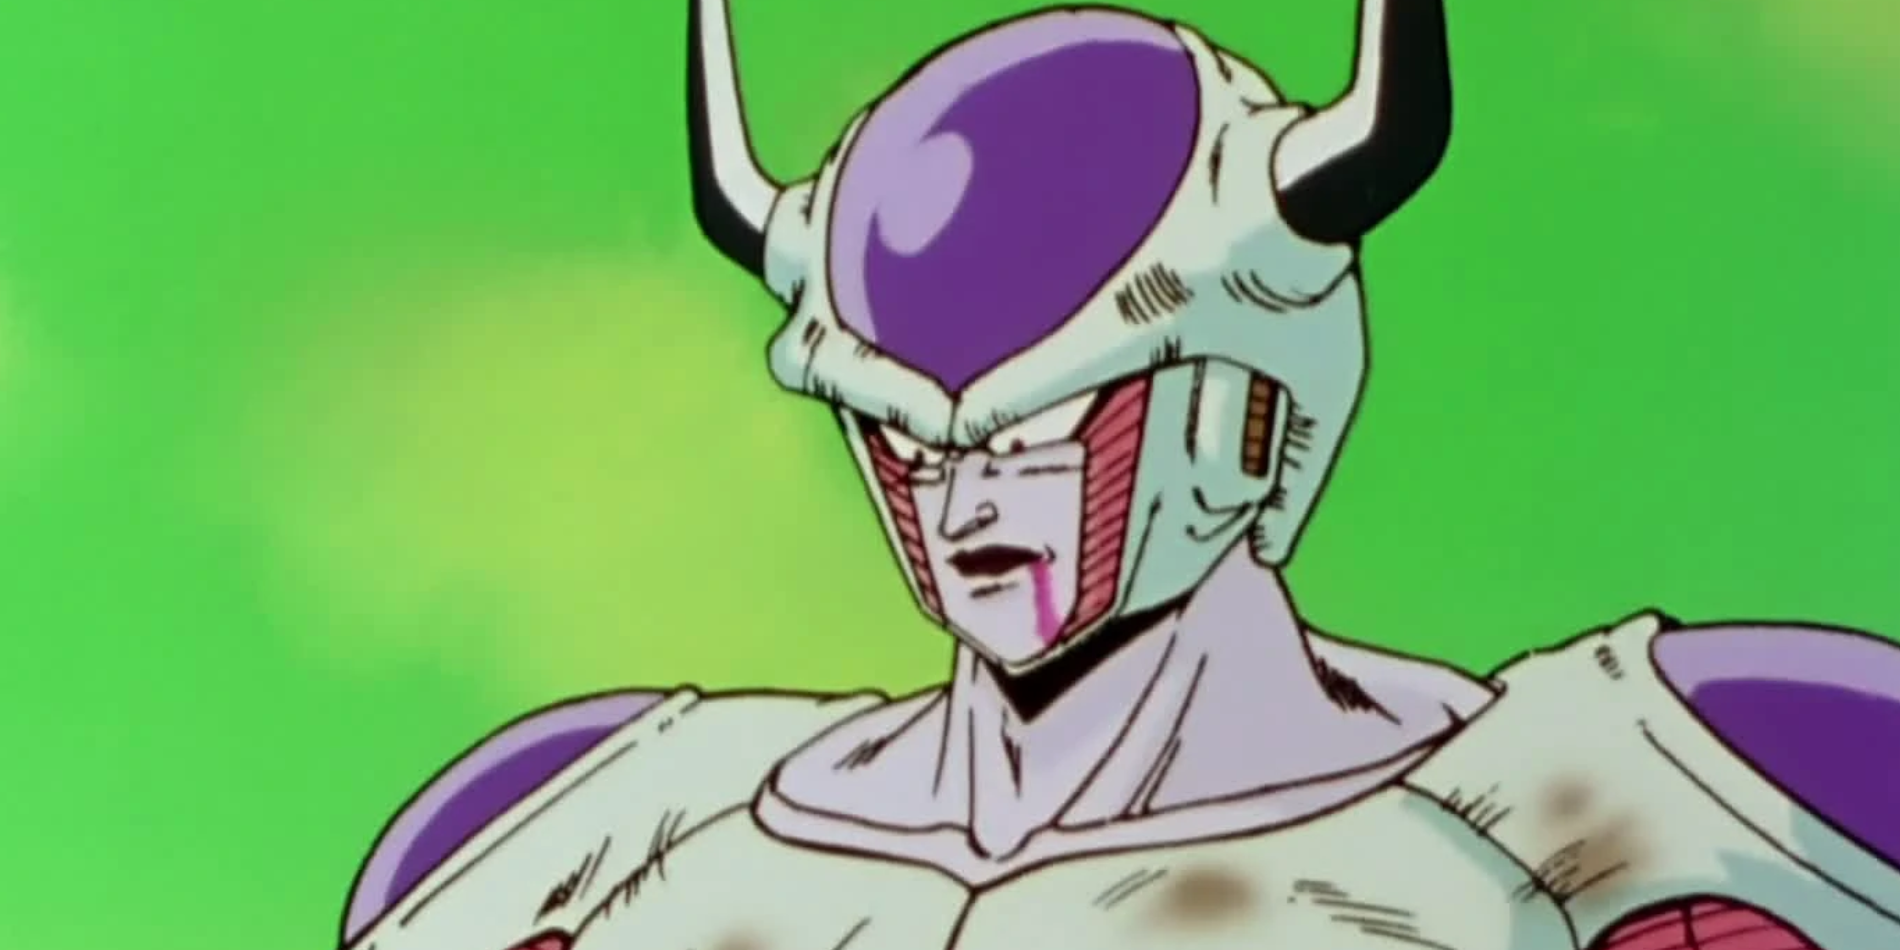 Frieza in his 2nd Form